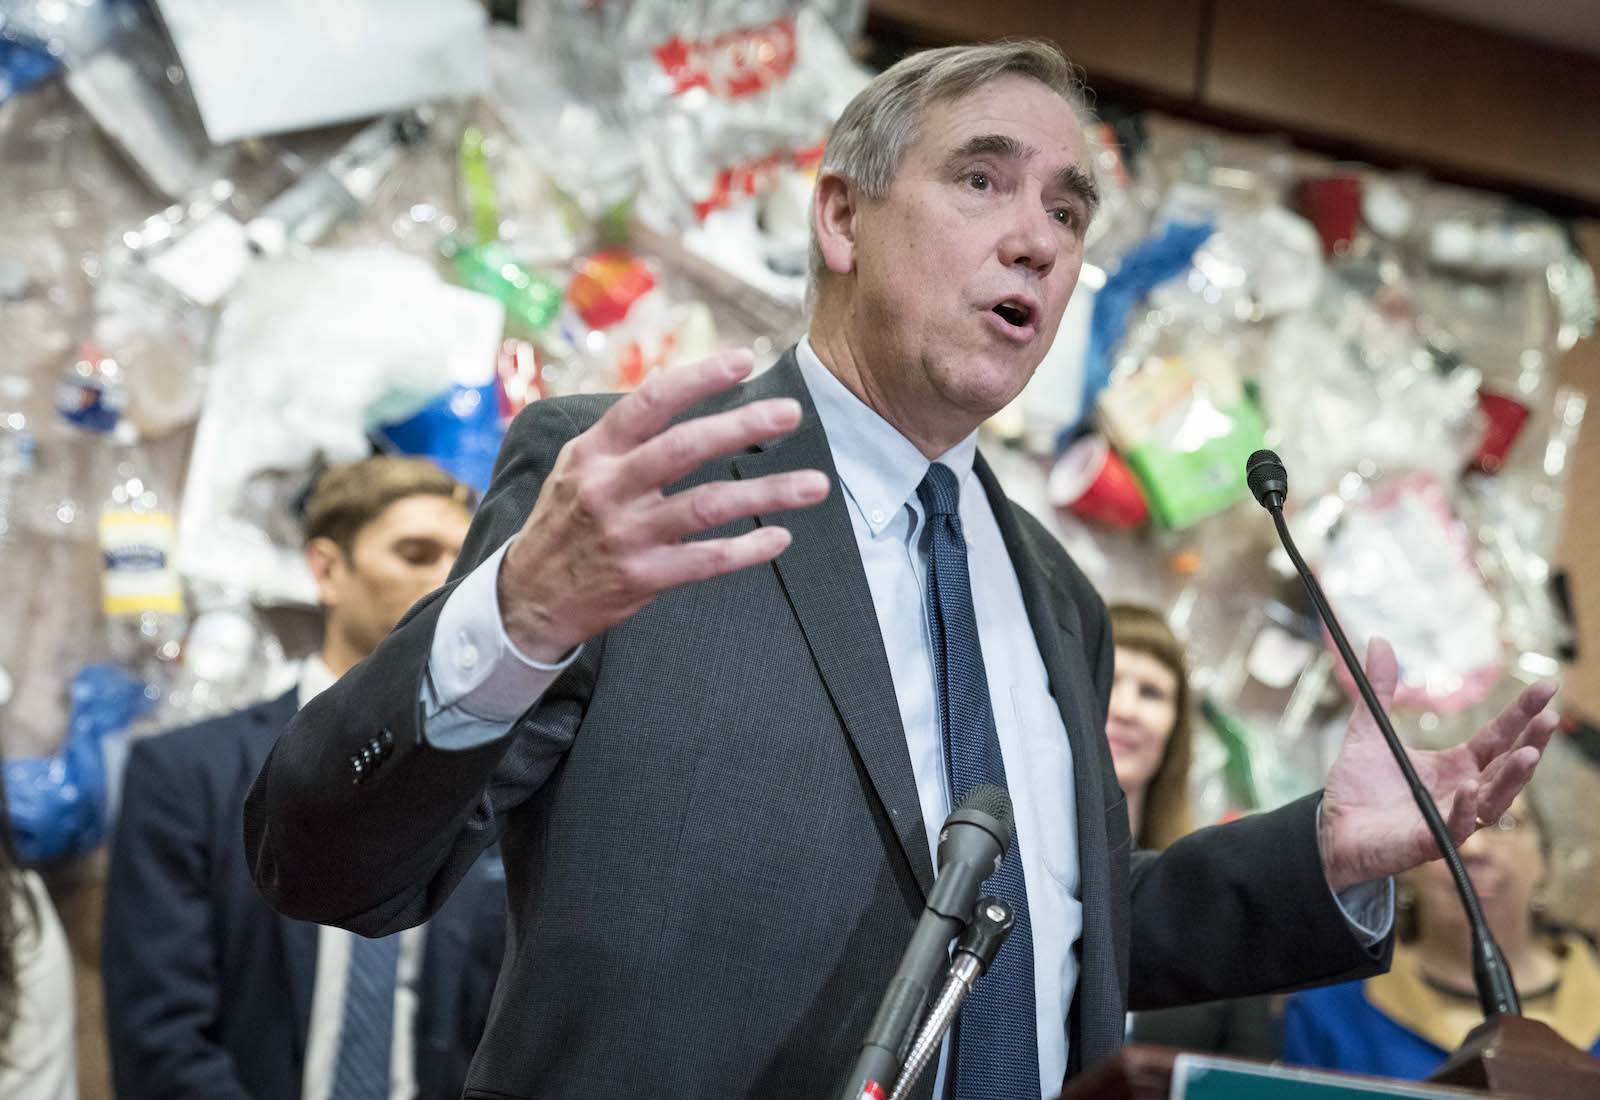 Congressional Democrats have a new plan to combat plastic pollution